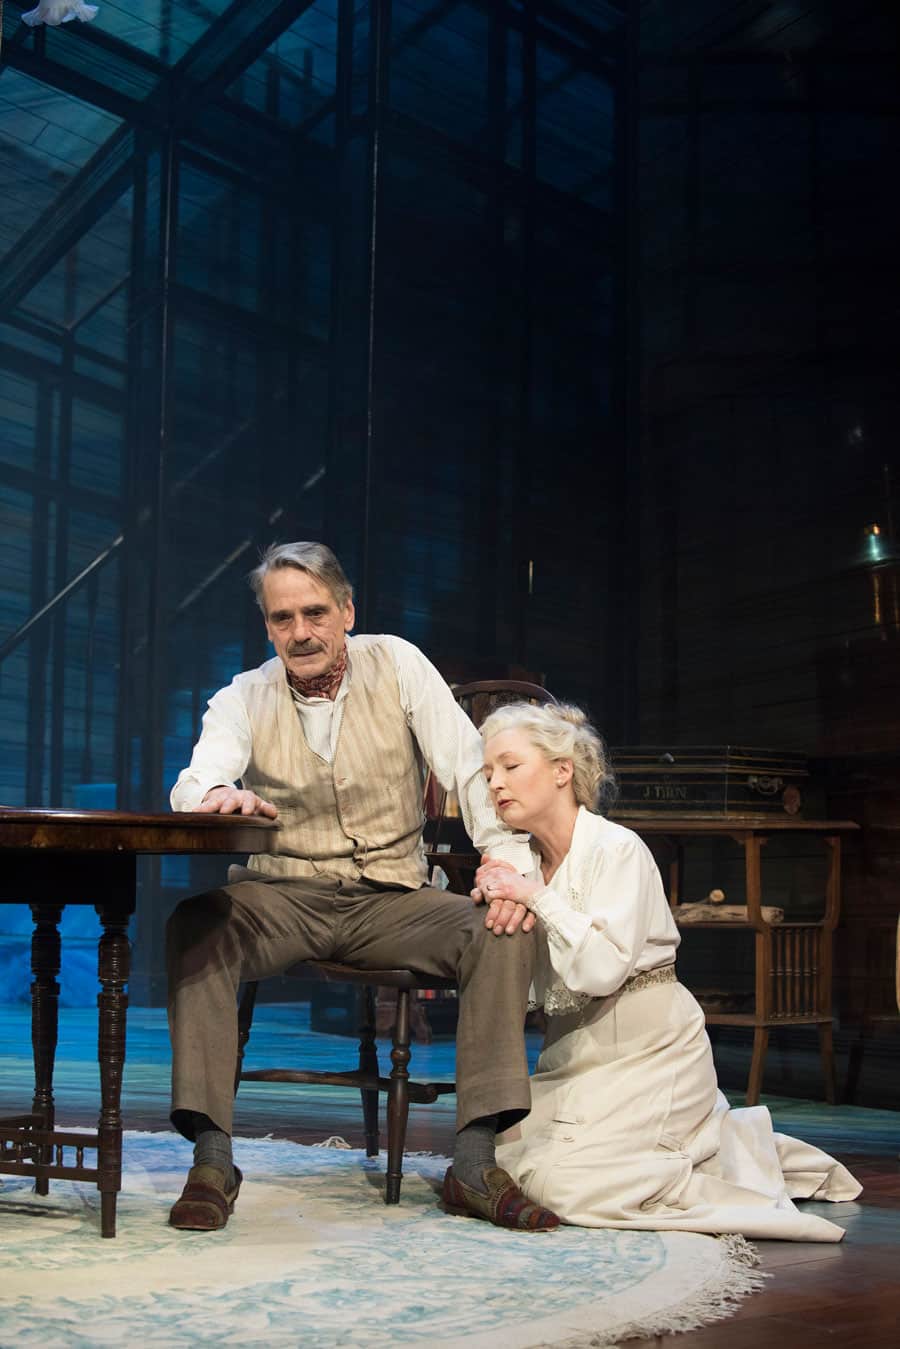 London Day's Journey Into Night at Wyndham's Theatre